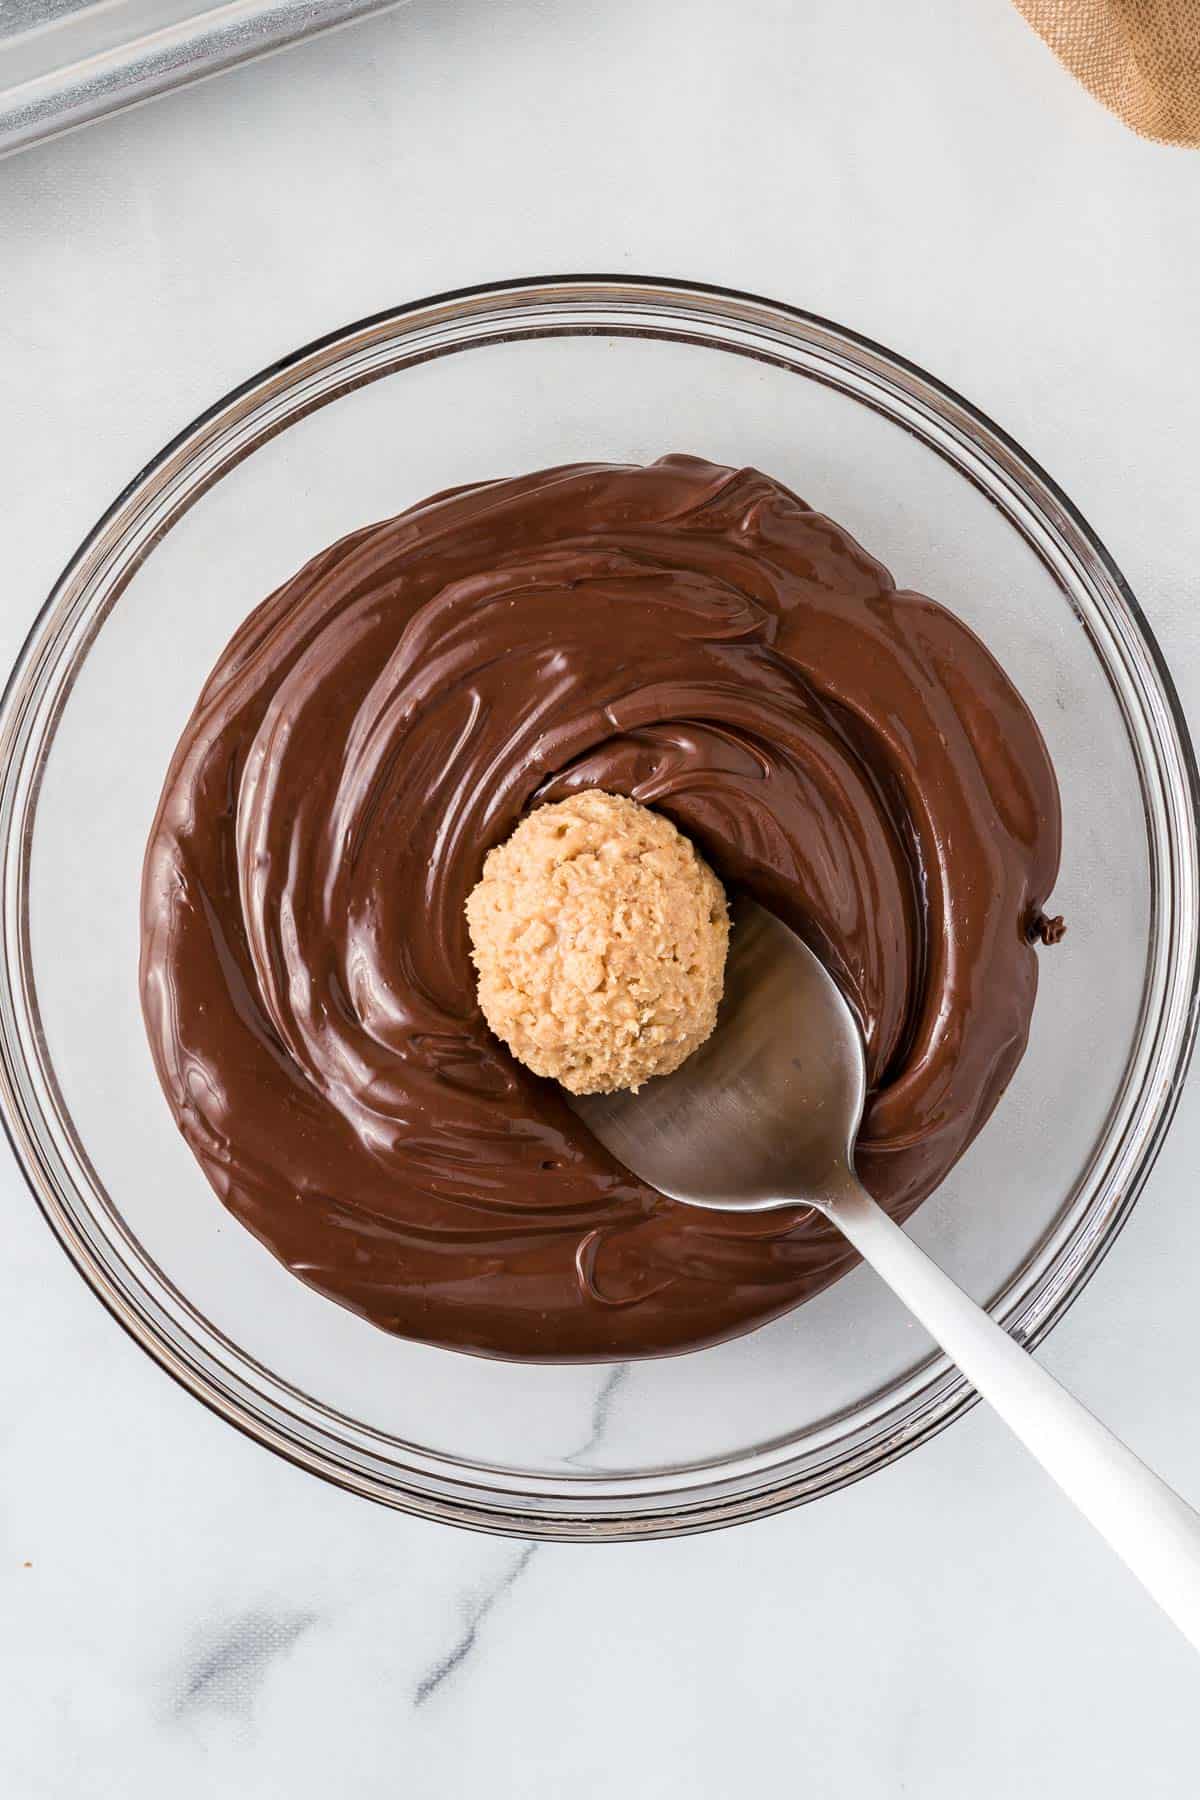 dipping a peanut butter ball into melted chocolate